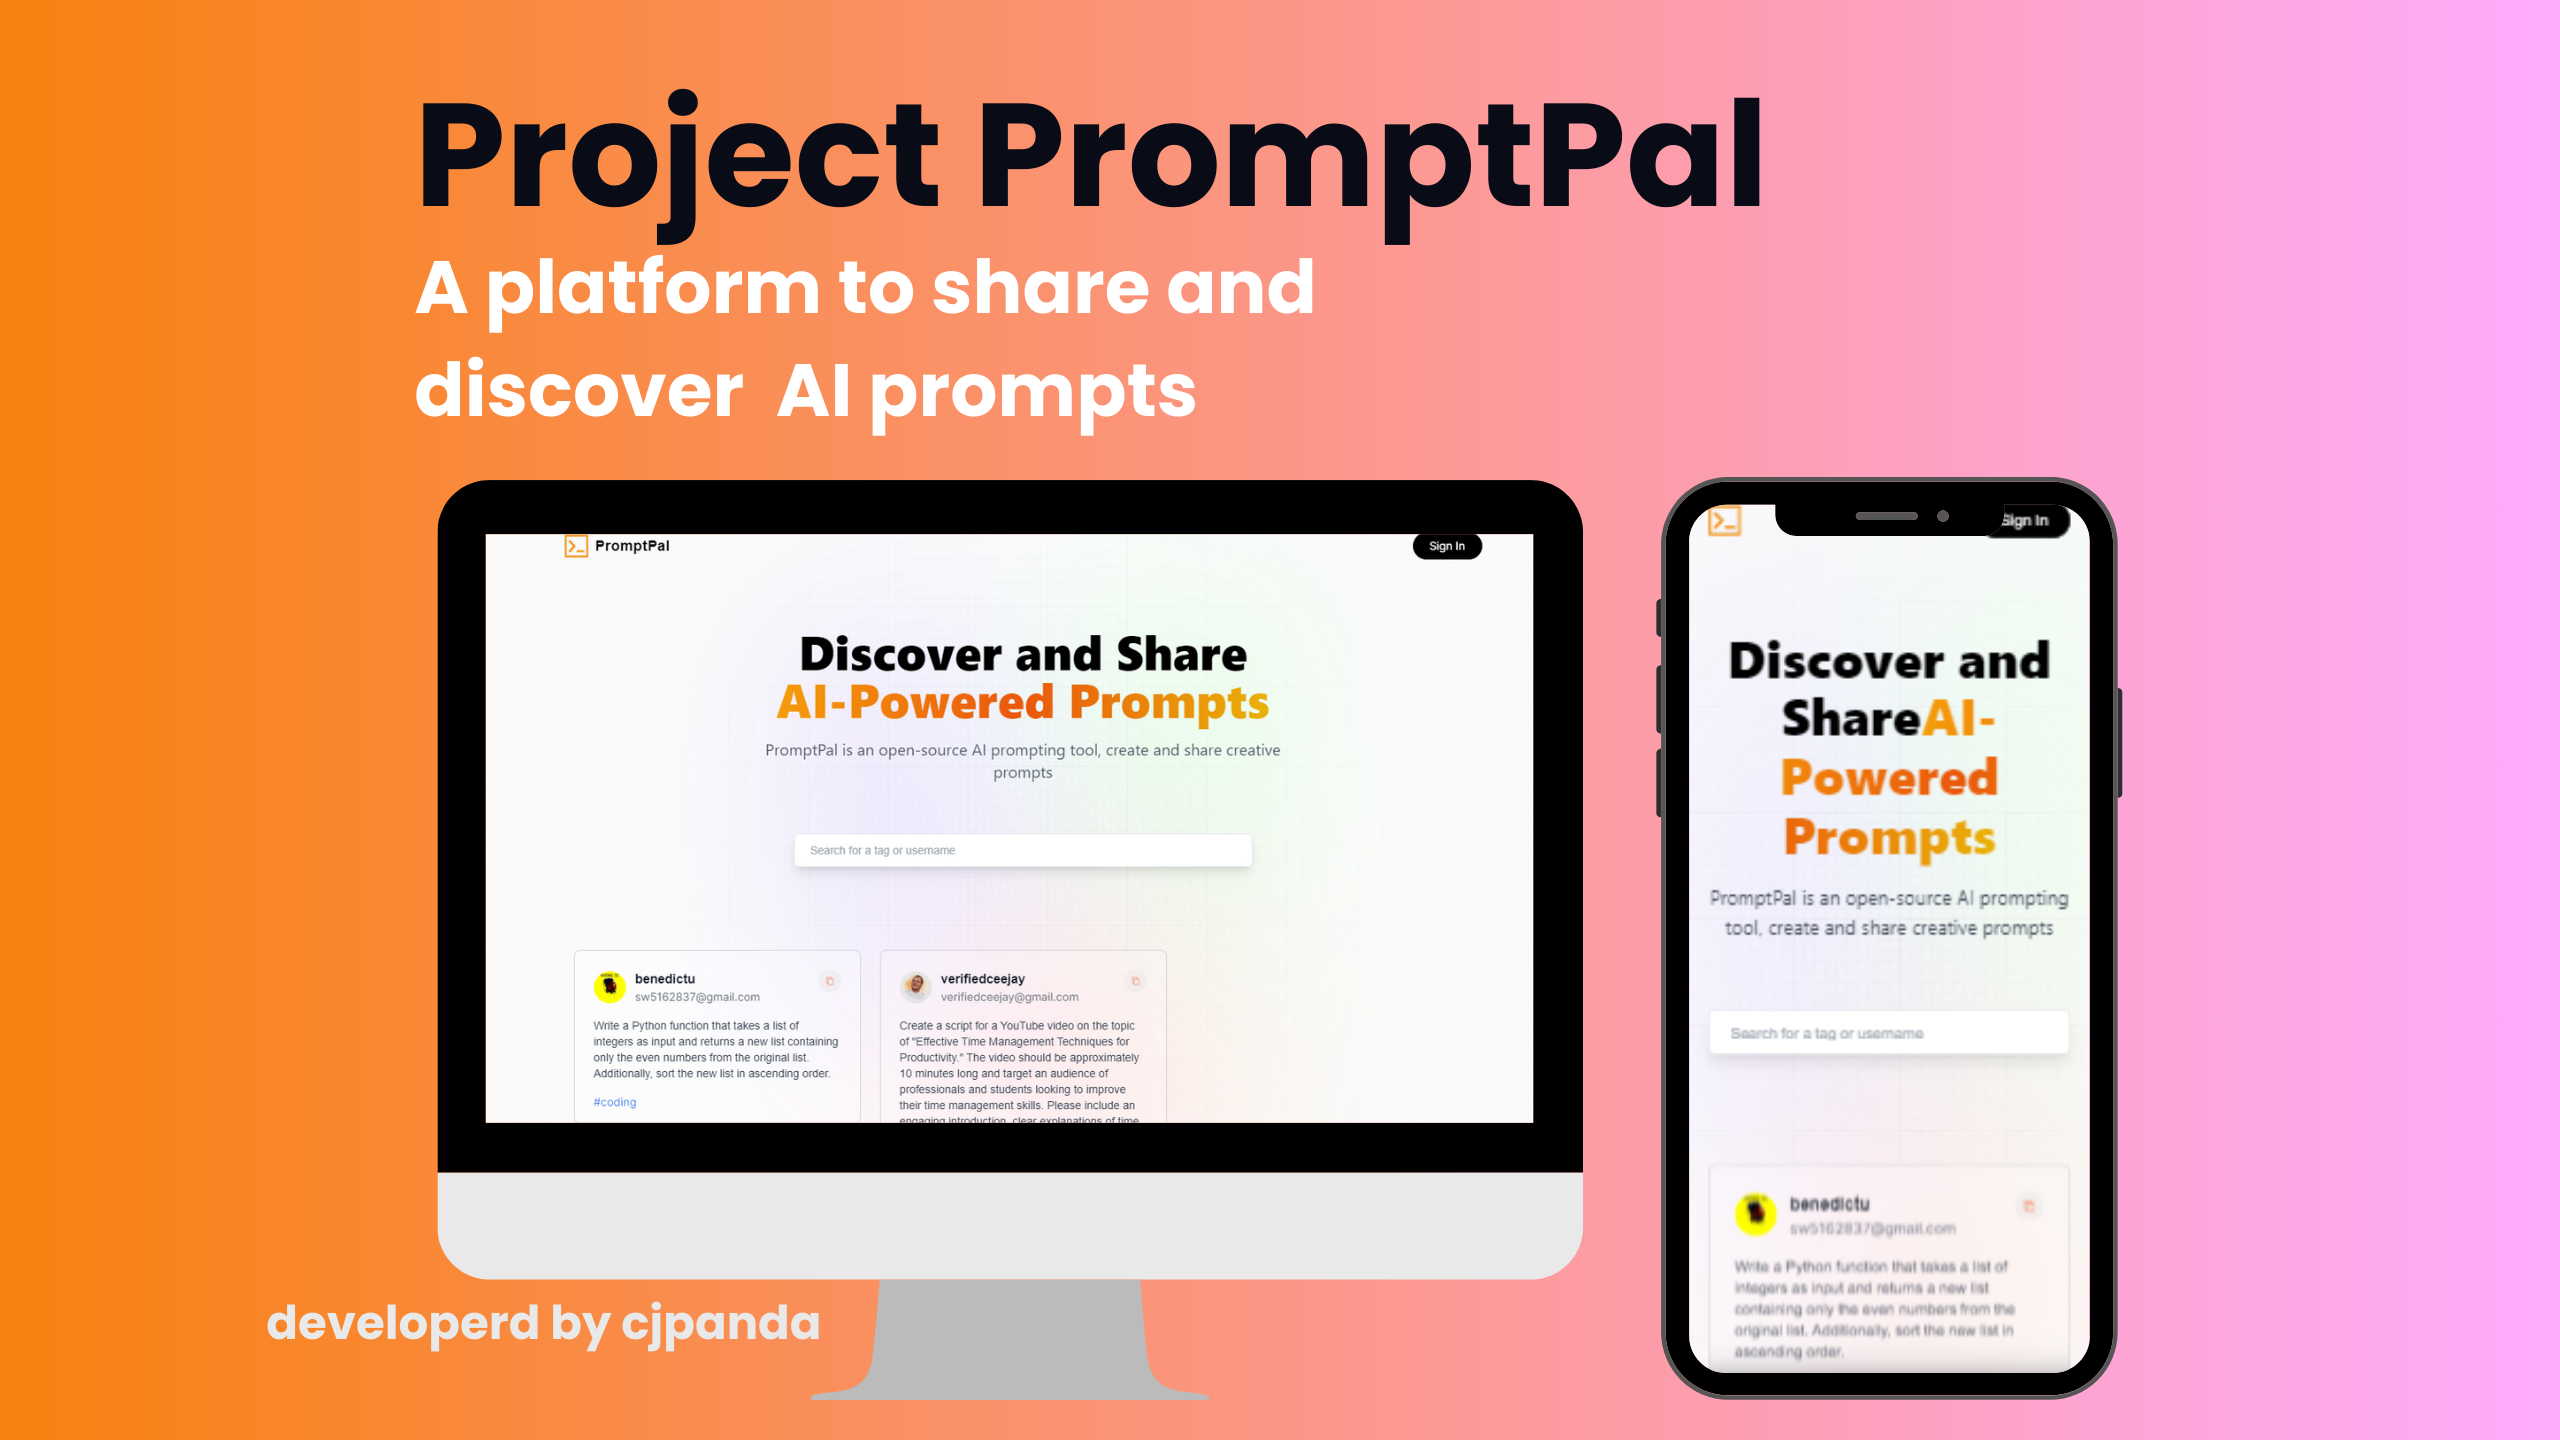 Project PromptPal